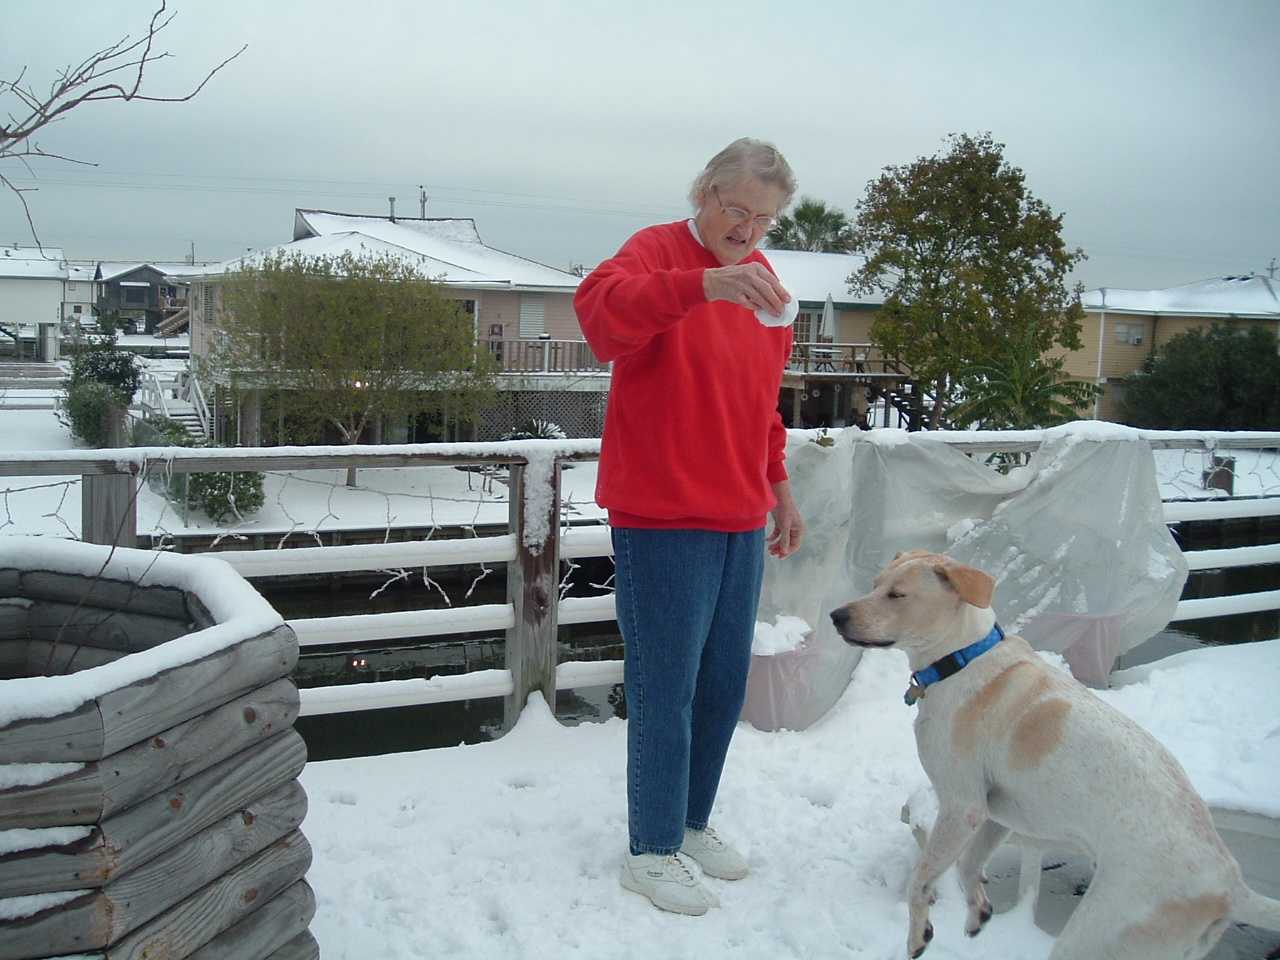 Baxter catching a snowball from Gran, who was visiting from Pensacola.